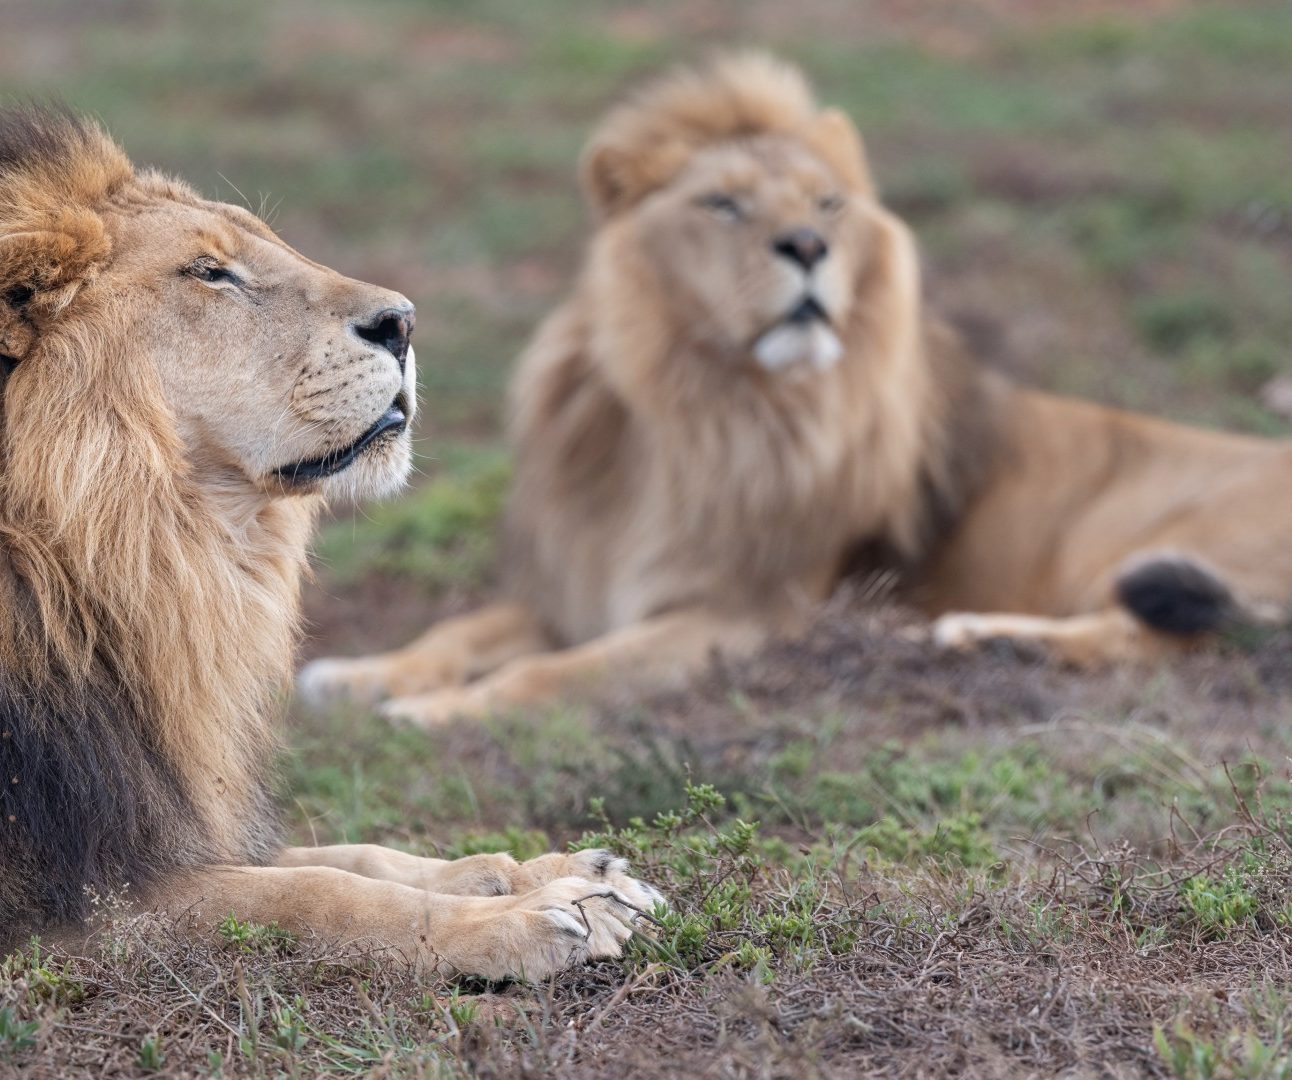 Two lions lying together on the grass. The lion in the foreground is side-on to the camera and looking up to the sky with his eyes closed.